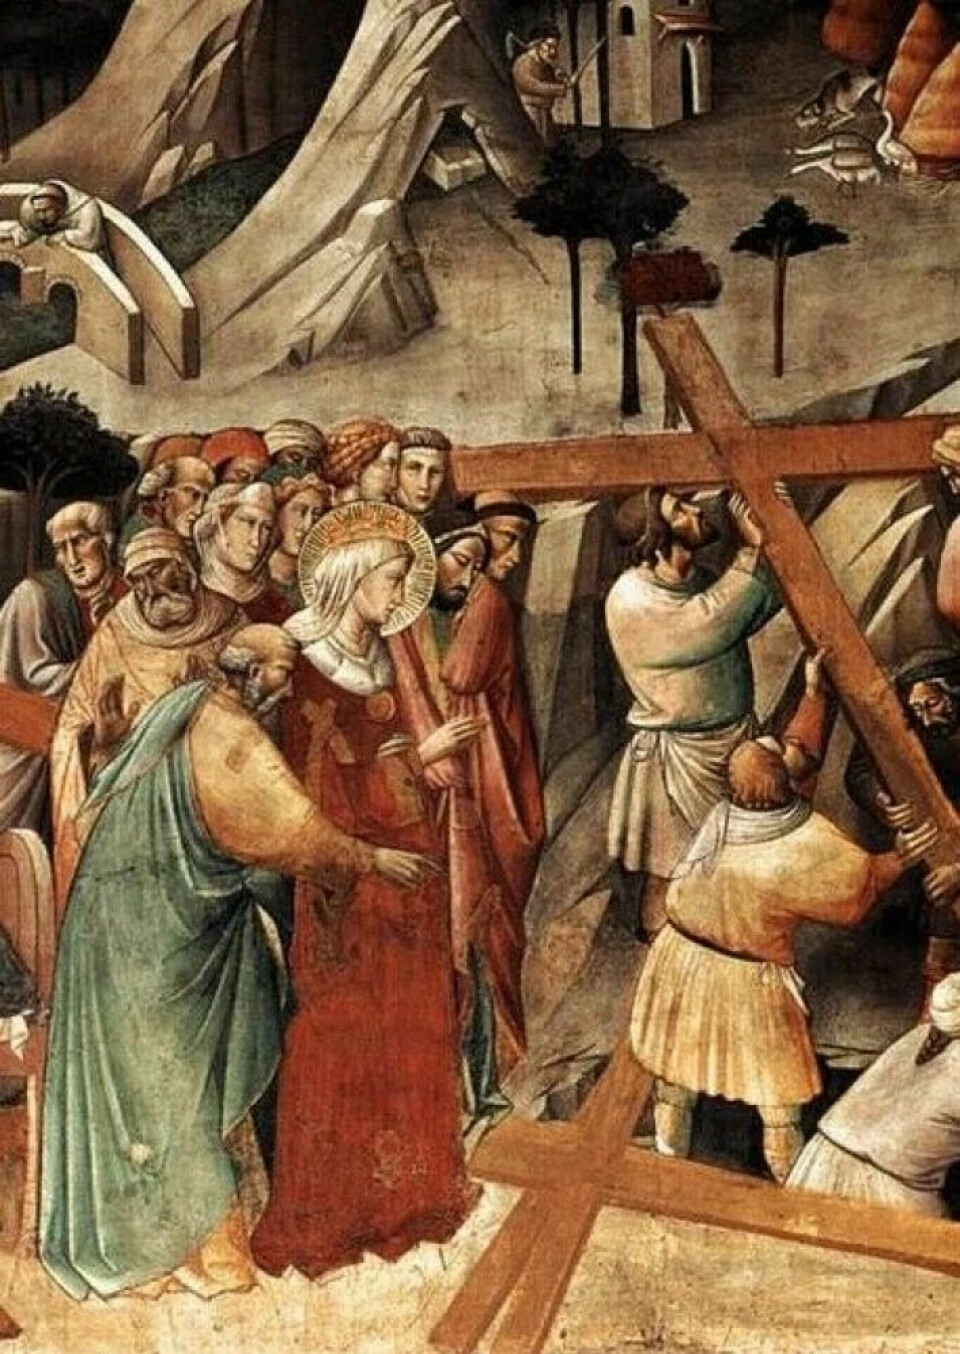 The Italian painter Agnolo Gaddi's rendering of Helena's rediscovery of the True Cross.